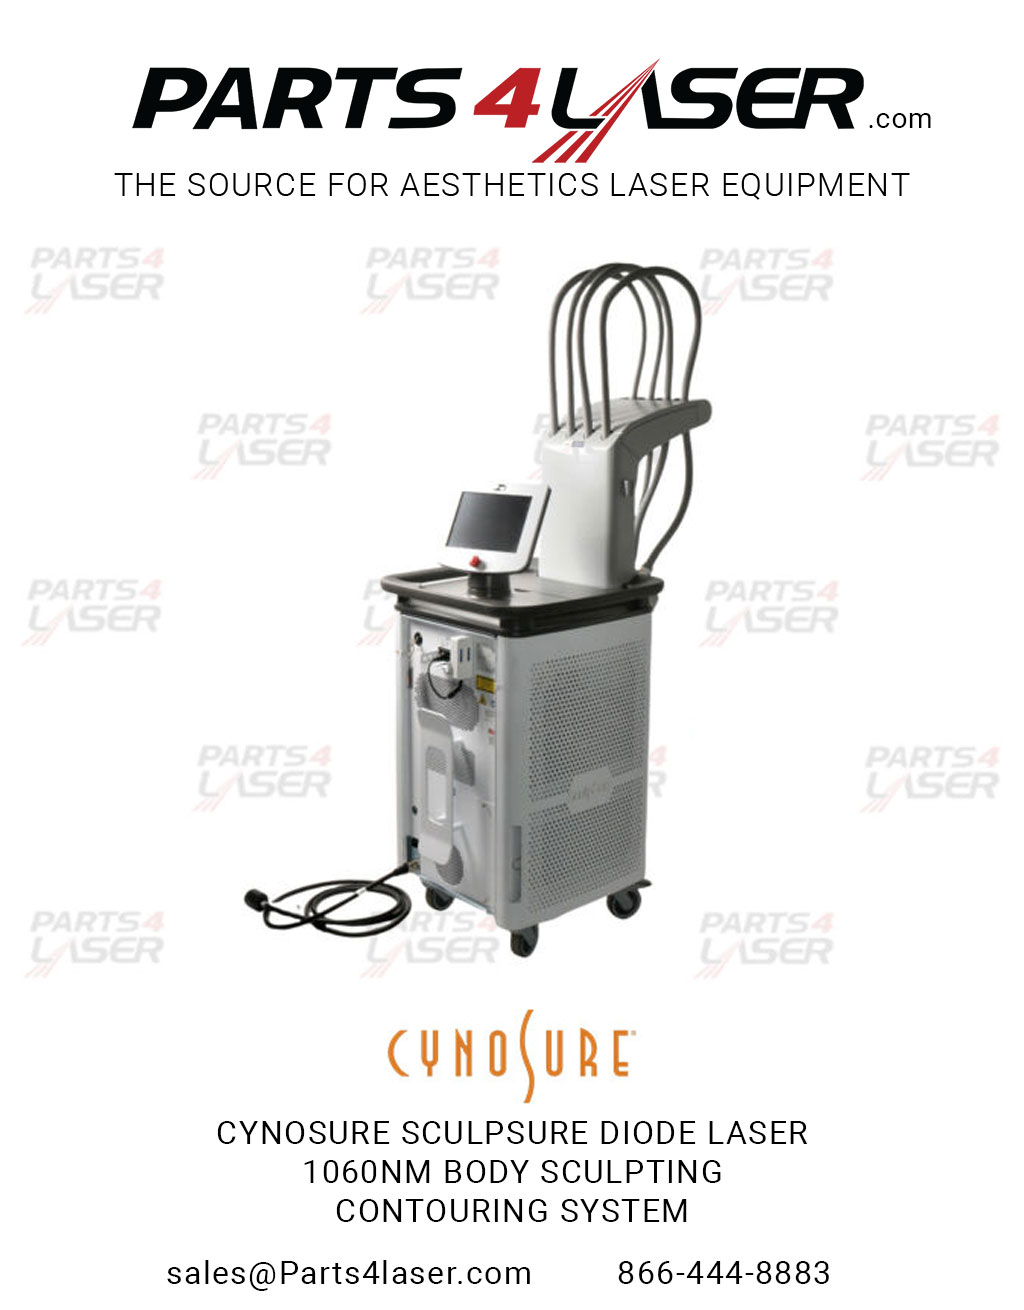 CYNOSURE SCULPSURE DIODE LASER 1060NM BODY SCULPTING CONTOURING